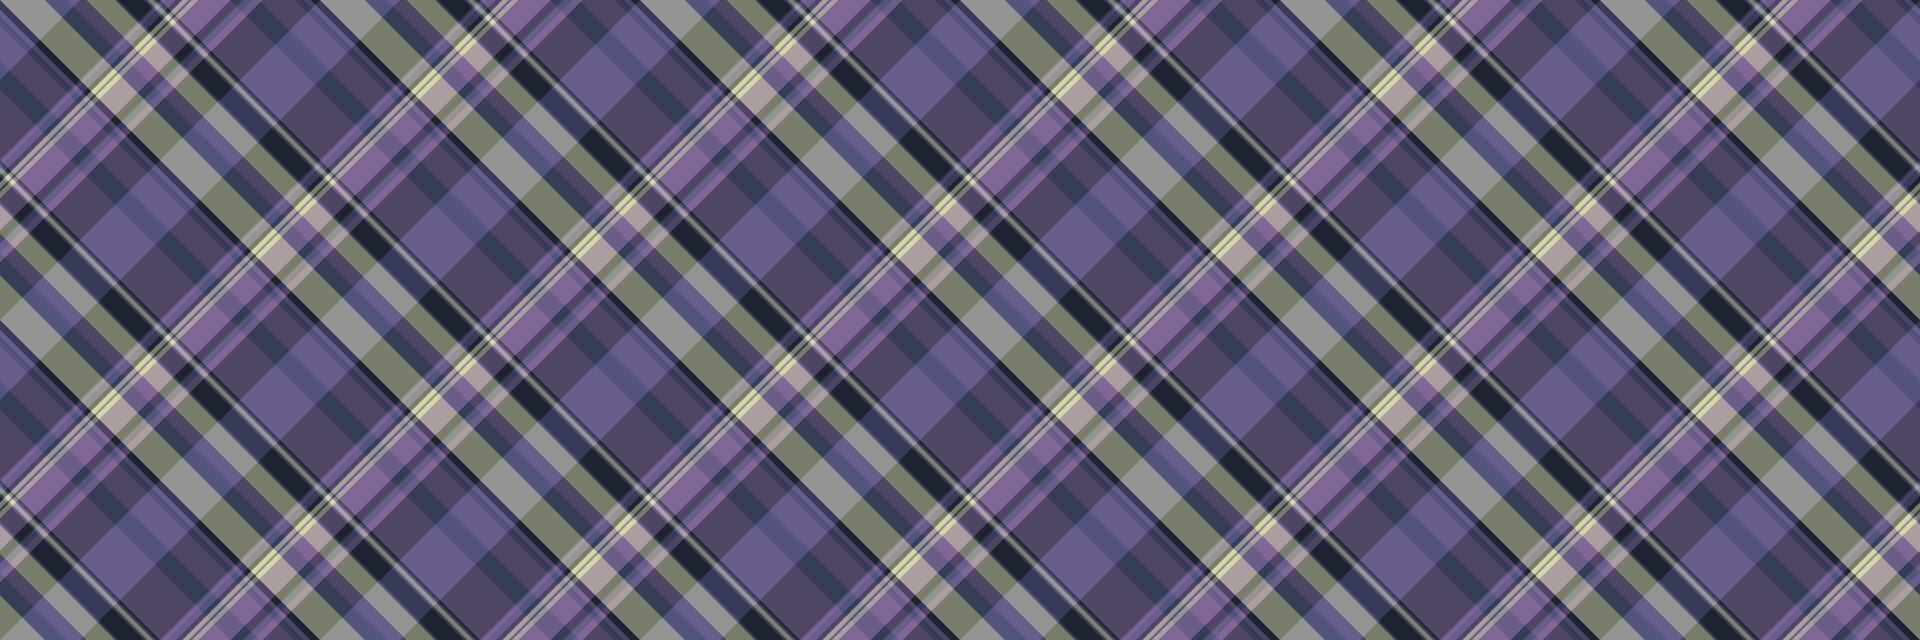 Romance tartan seamless pattern, retro textile texture background. Page fabric vector check plaid in blue and pastel colors.